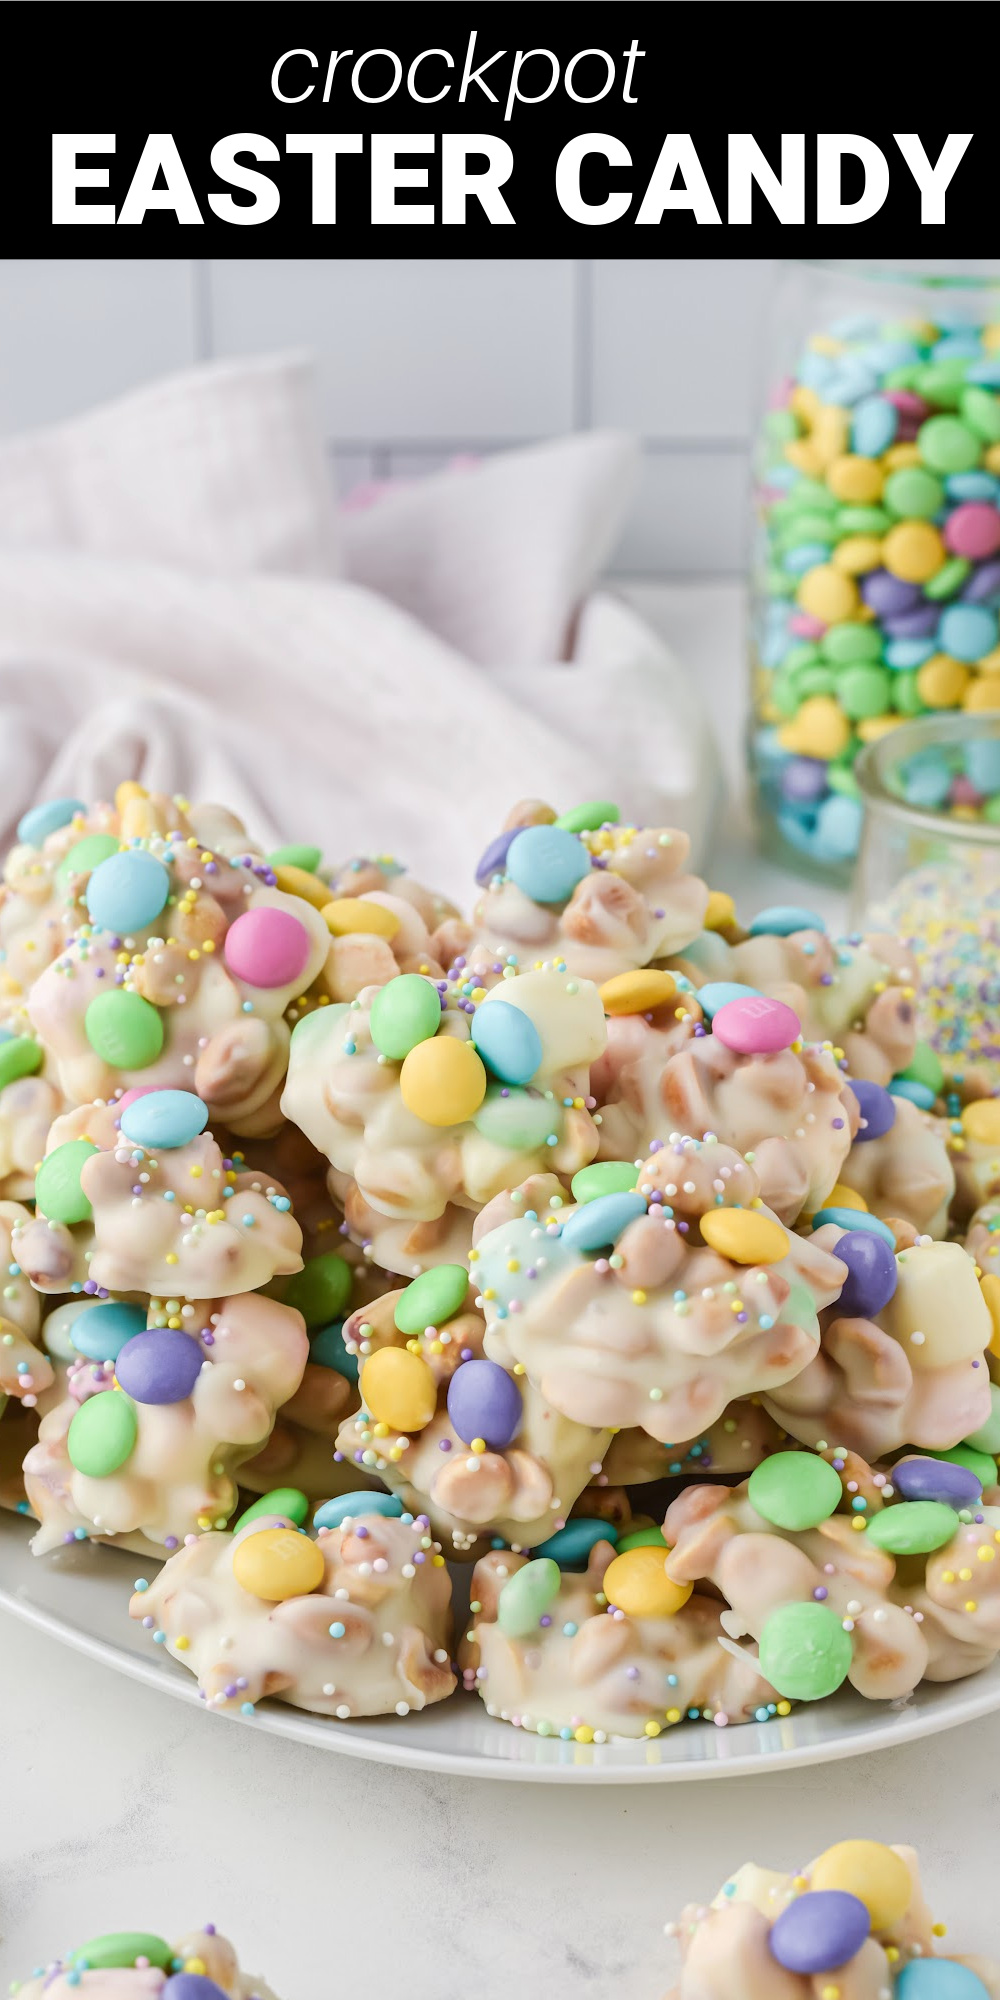 Bright and colorful white chocolate peanut clusters with colorful sprinkles make this delicious Easter Crockpot Candy the perfect homemade treat for Easter baskets, gift giving or to enjoy as a simple sweet treat!